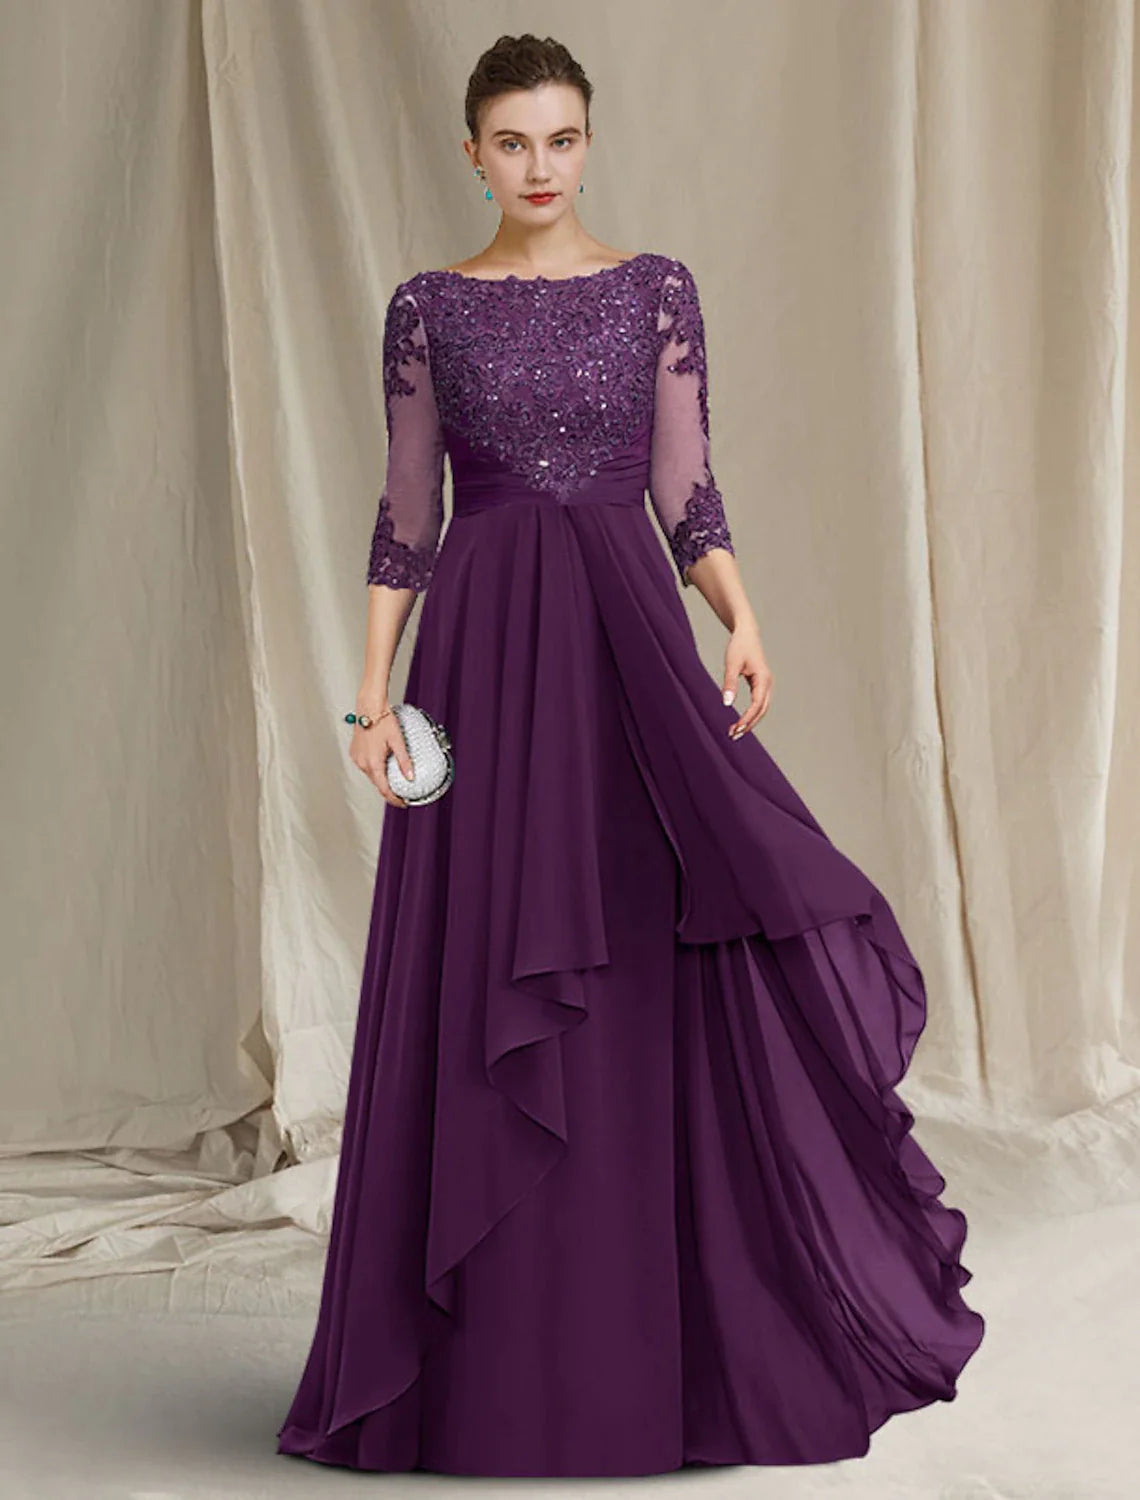 A-Line Mother of the Bride Dress Luxurious Elegant Jewel Neck Floor Length Chiffon Lace Sequined 3/4 Length Sleeve with Pleats Beading Appliques